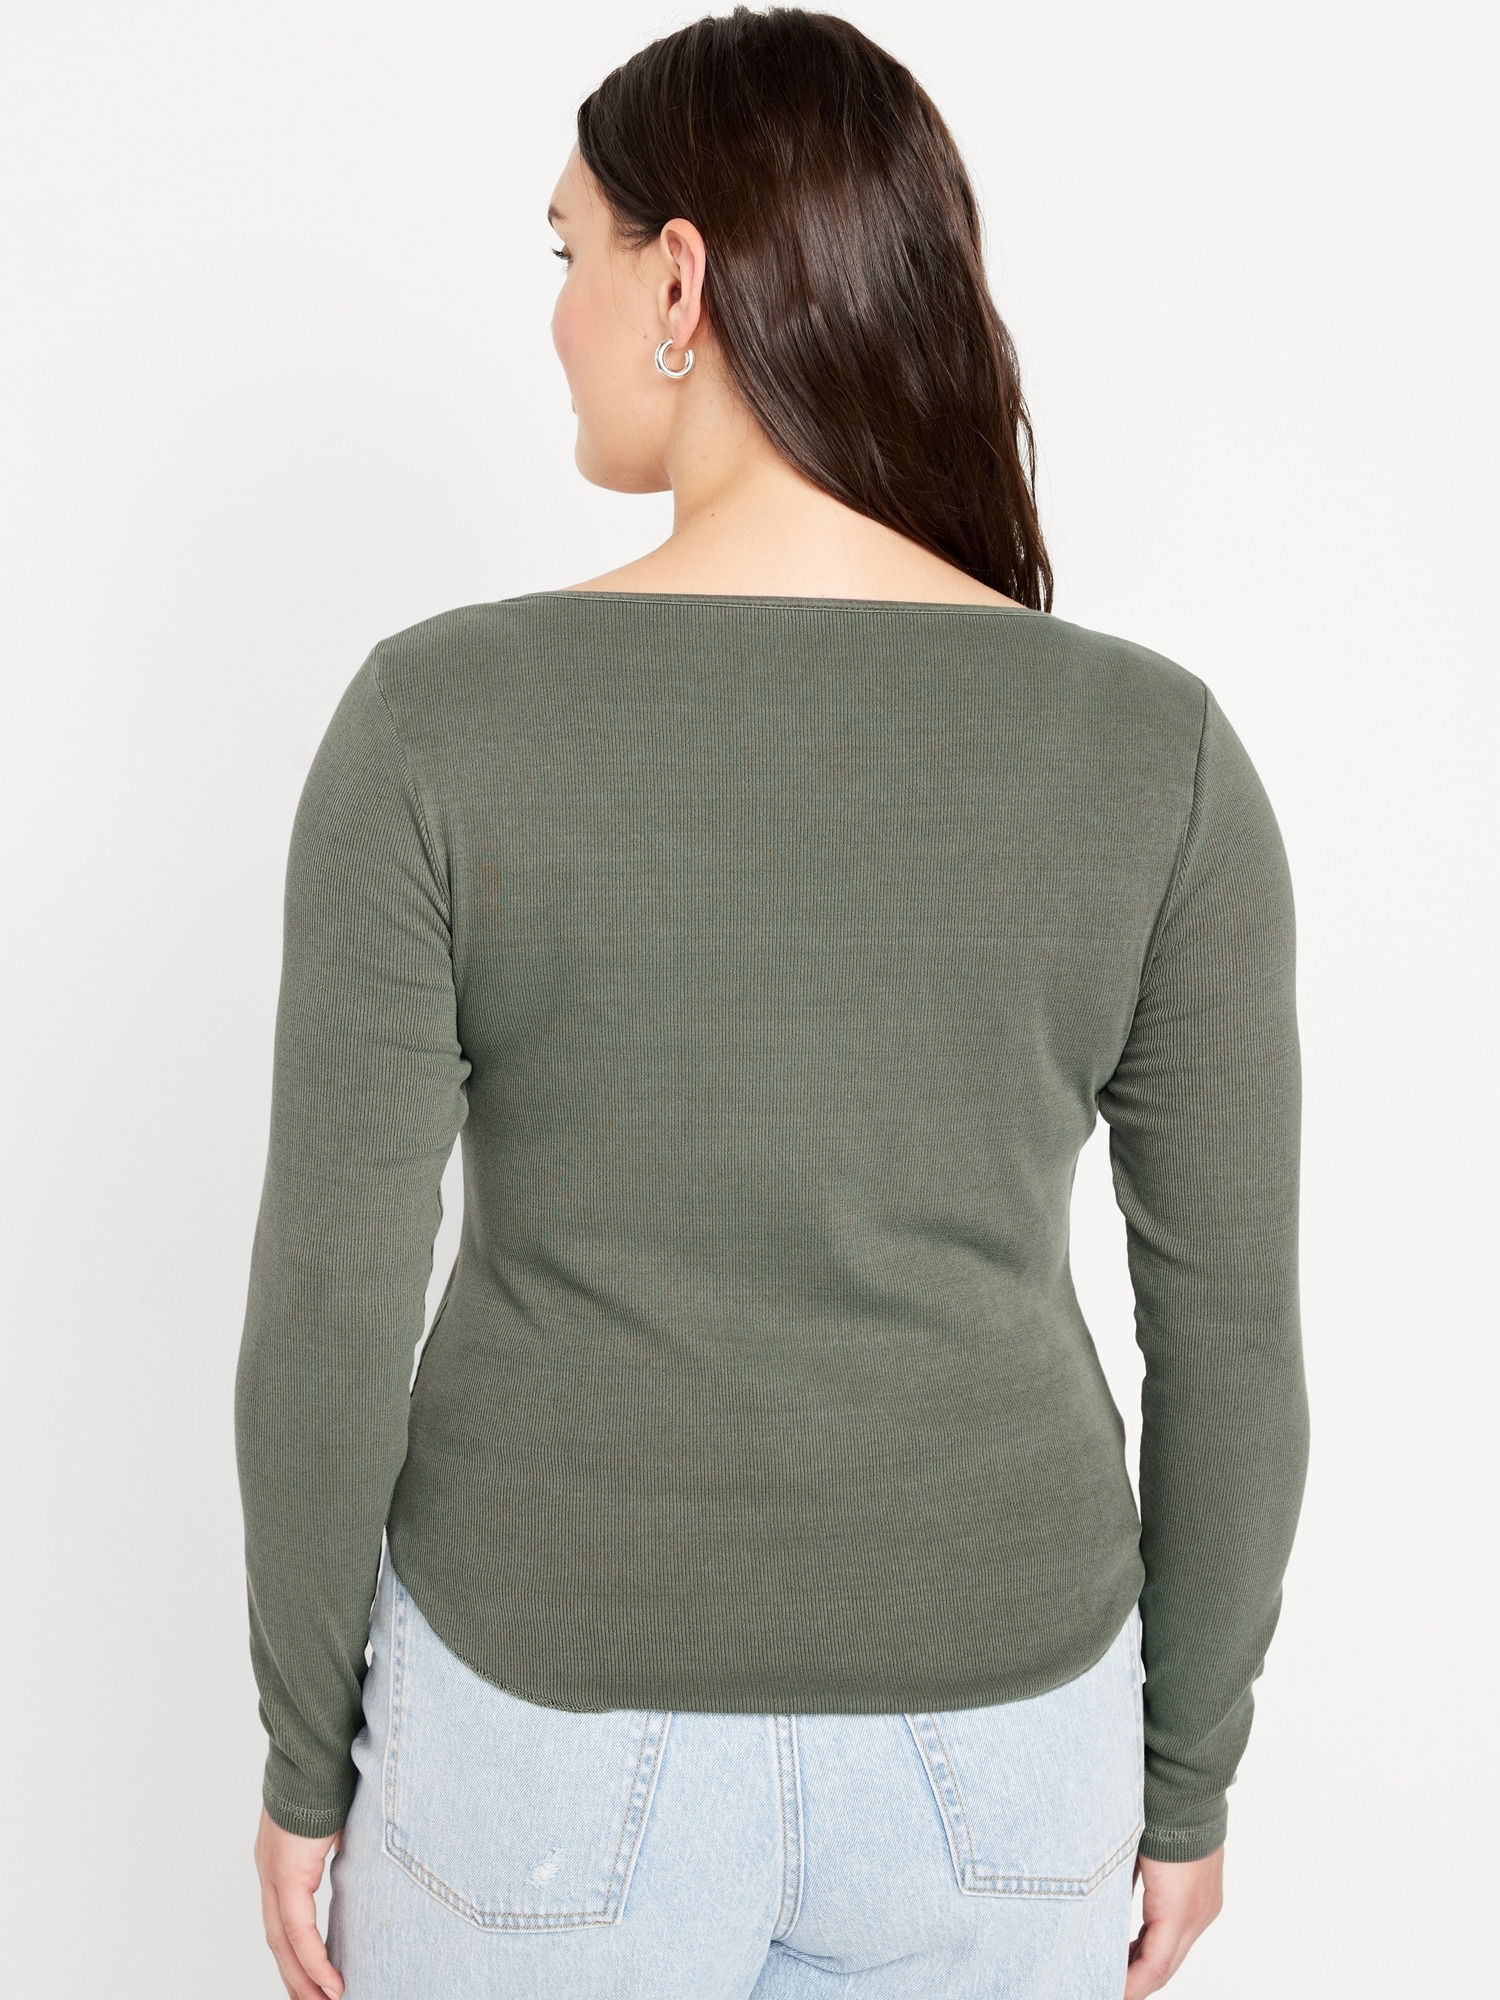 Fitted Long-Sleeve Rib-Knit T-Shirt Old | Women Navy for